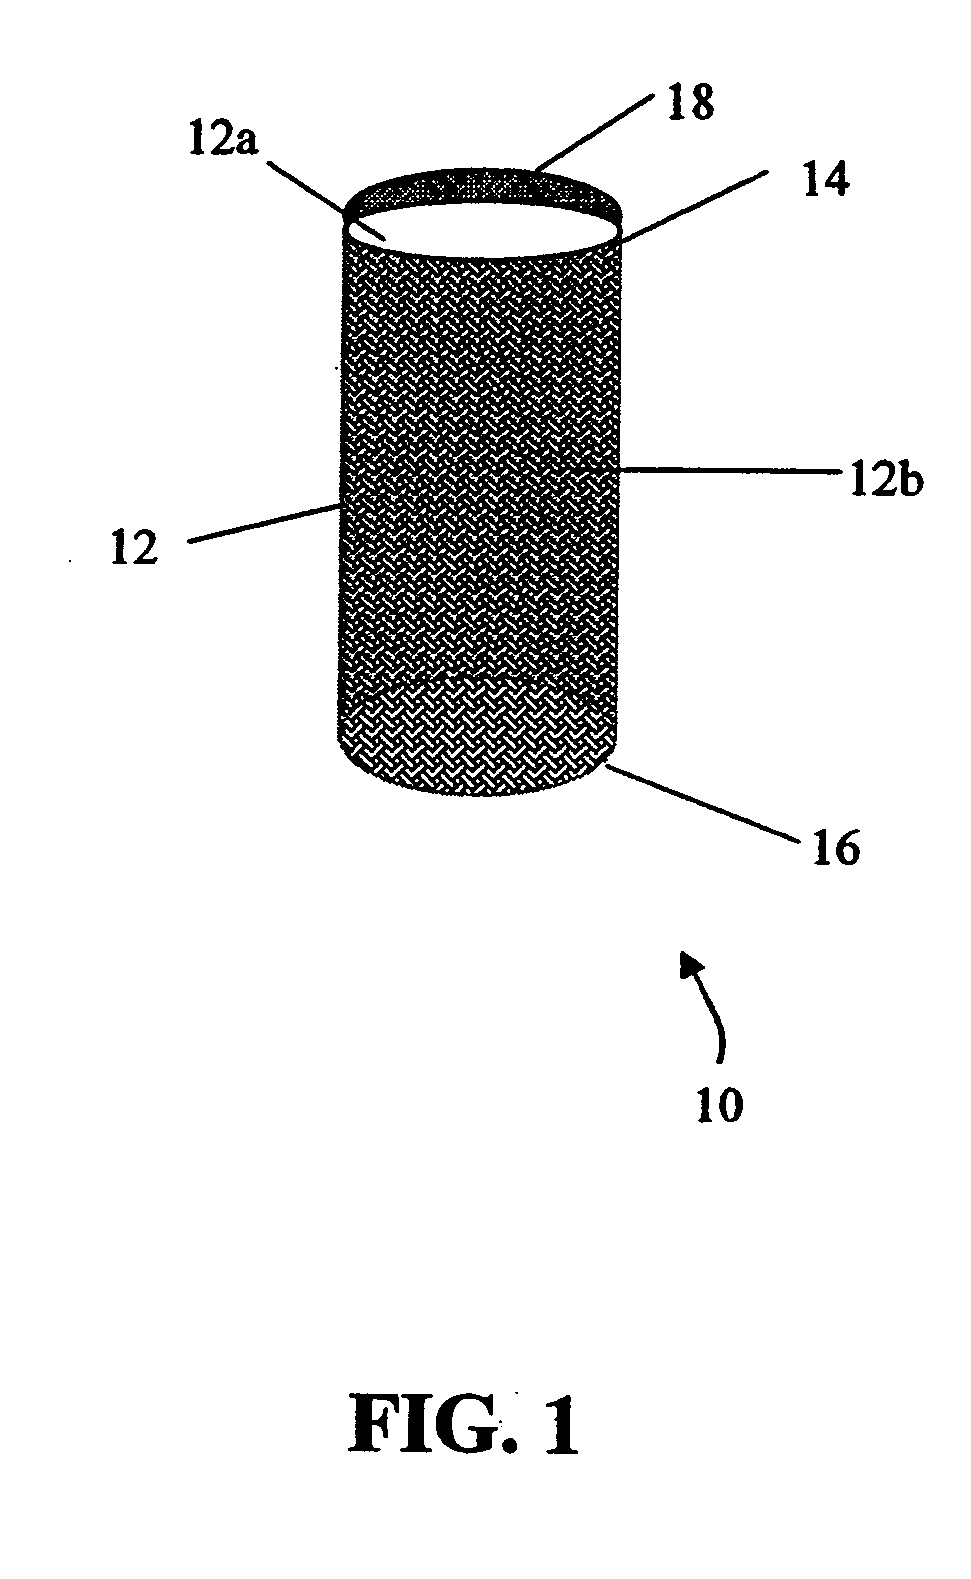 Implantable prosthesis having reinforced attachment sites